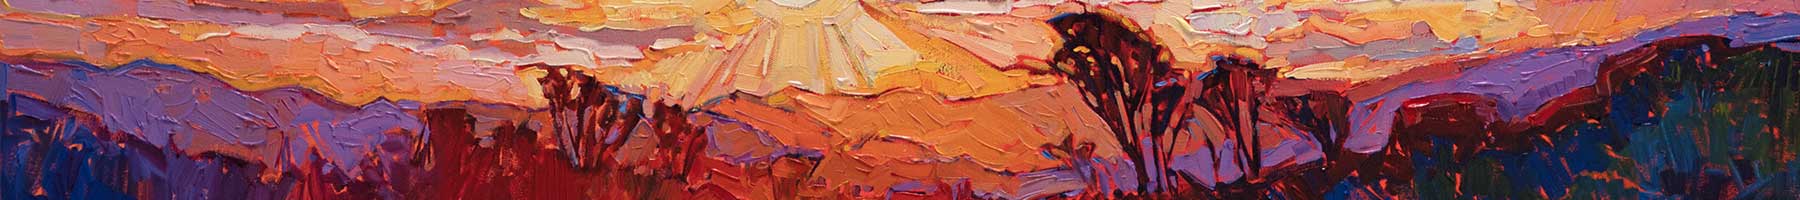 detail of a painting of a sunset in oranges, golds, and purples